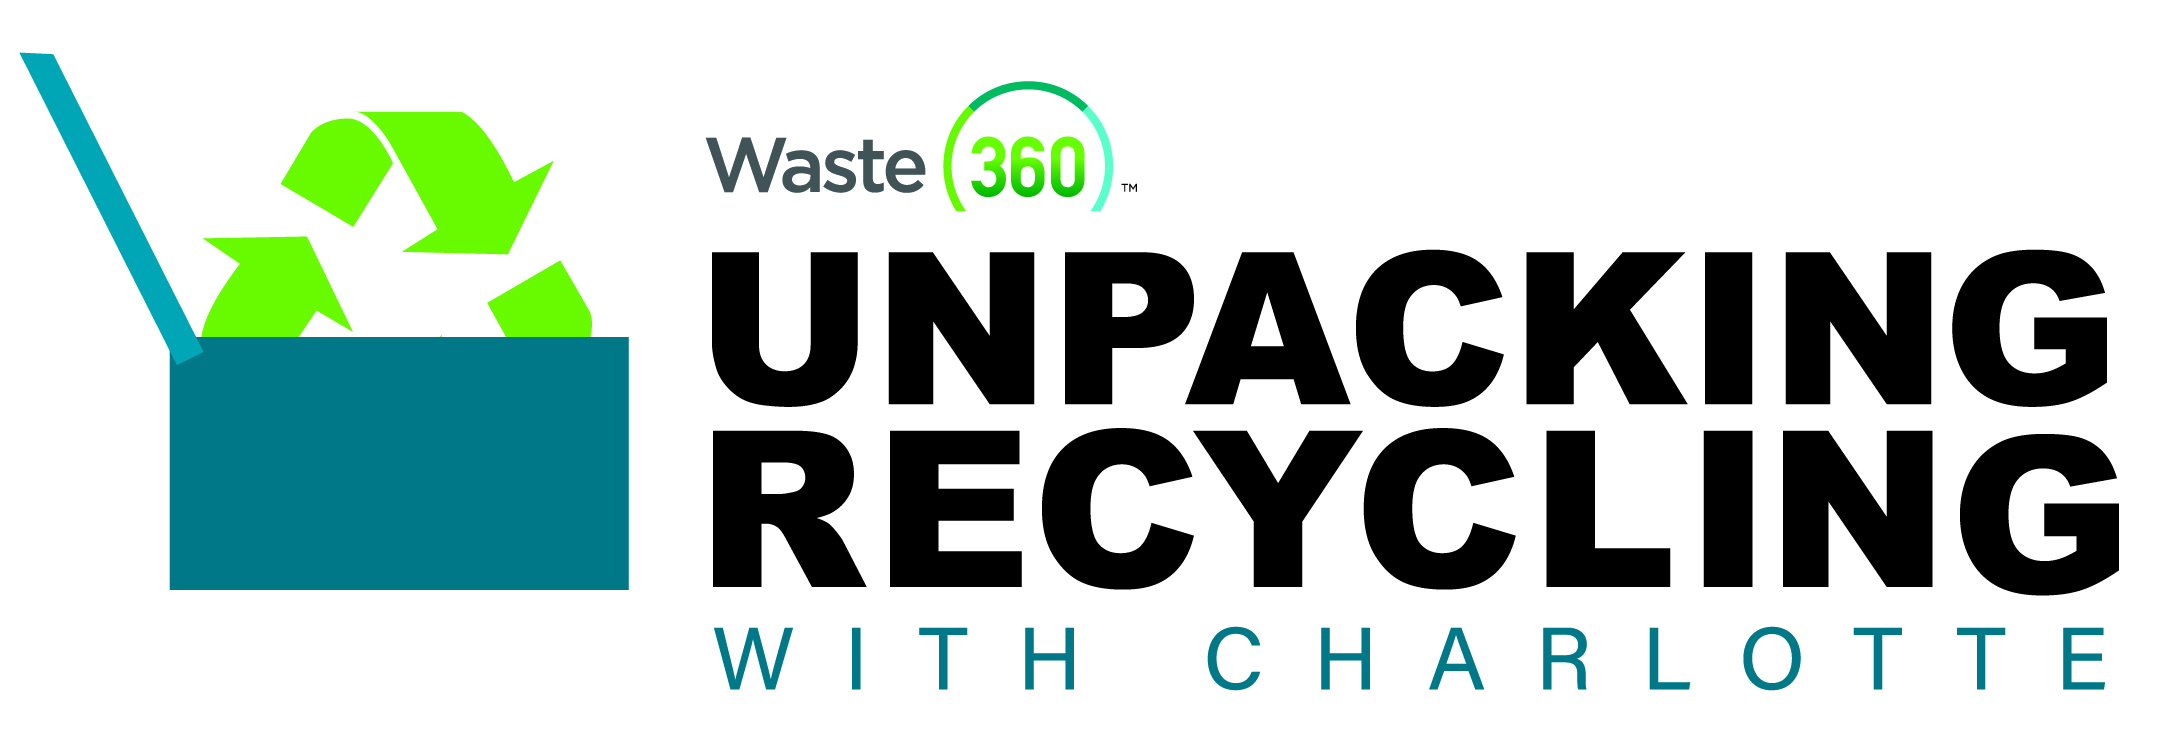 Waste360's Unpacking Recycling with Charlotte